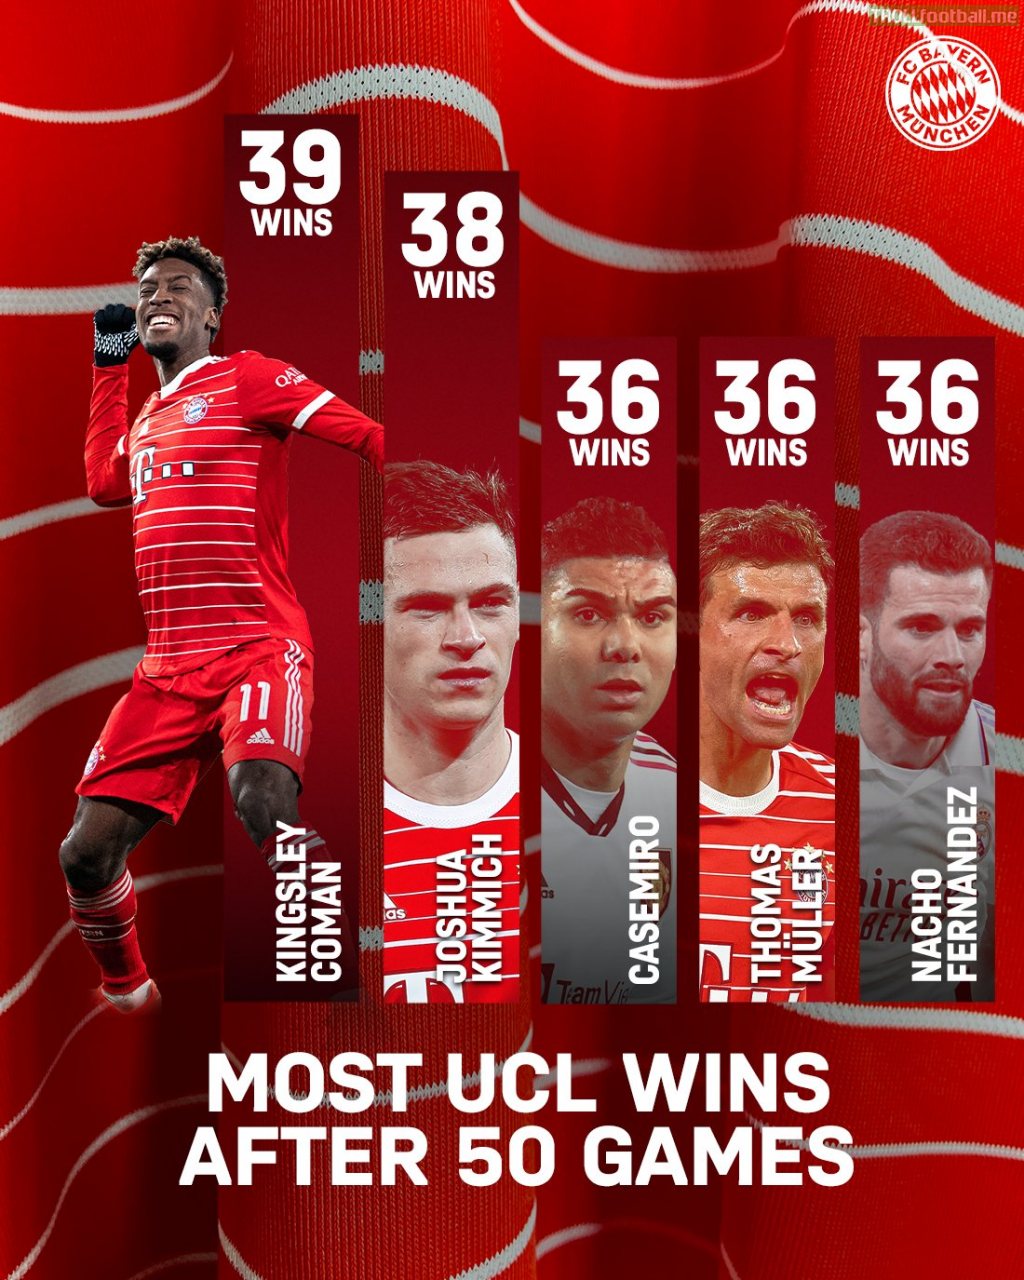 Most UCL wins after 50 Games